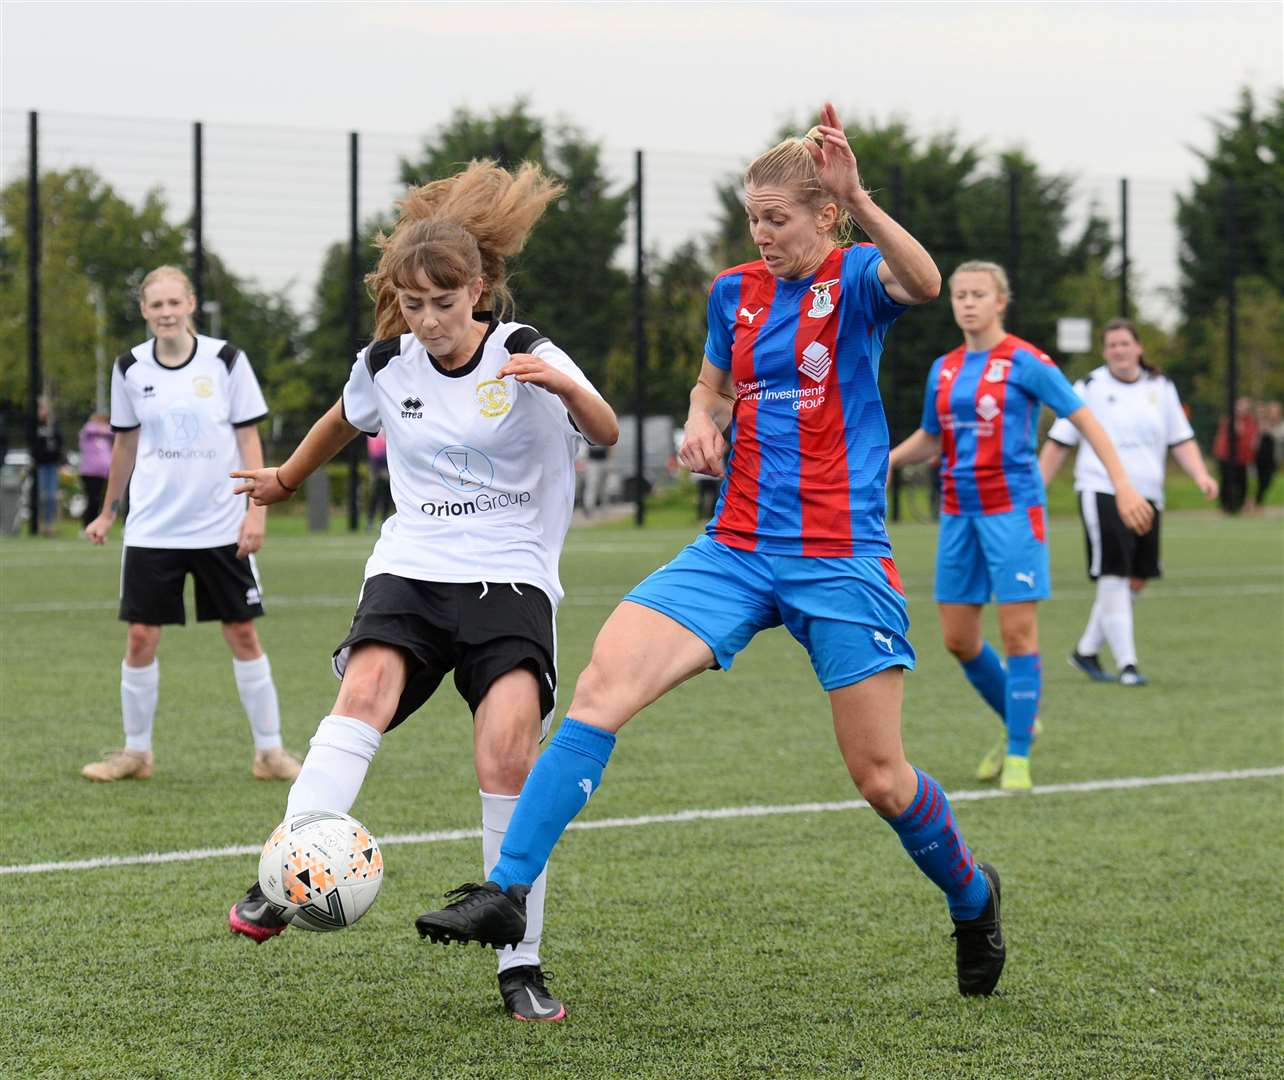 Mary Peteranna closes down Clach's Kirsty Smith. Picture Gary Anthony.